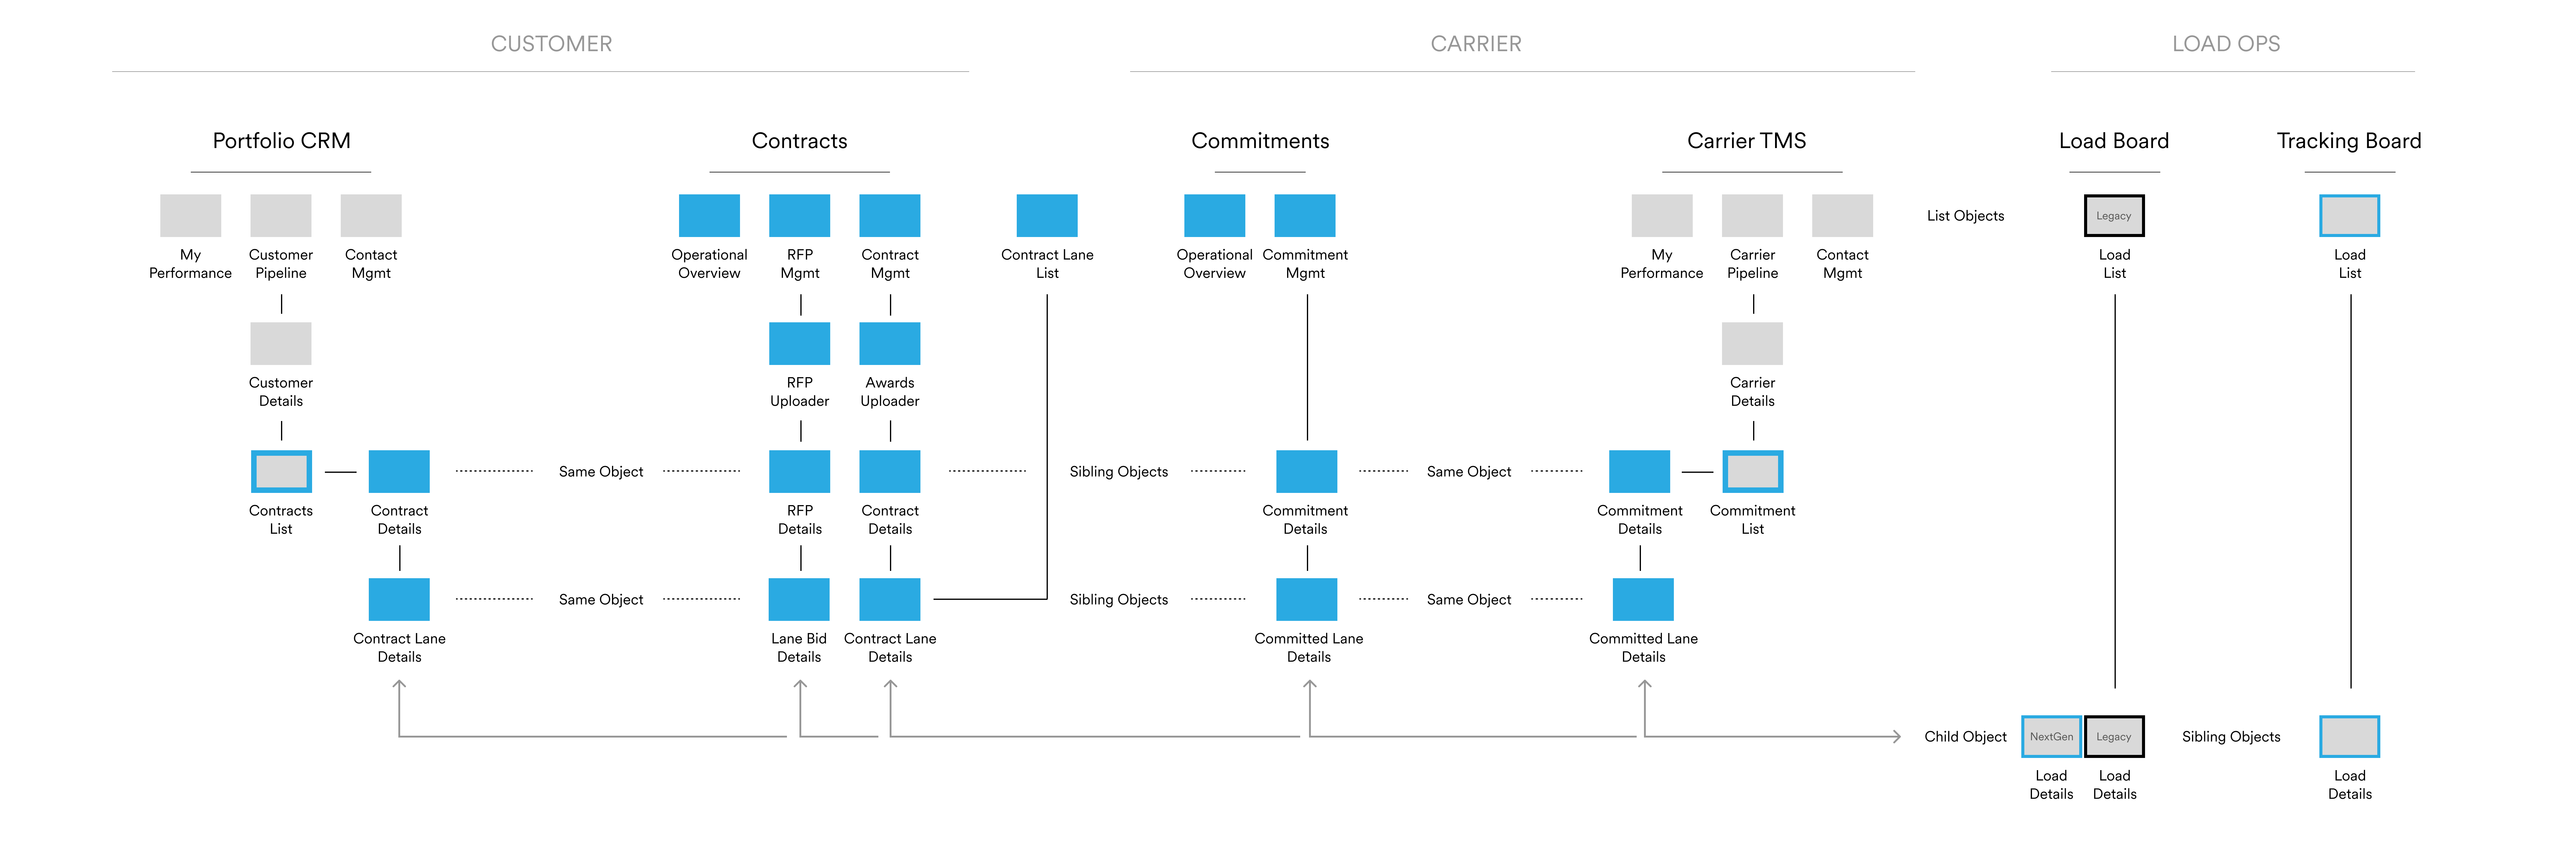 Site Map illustrating contract system bridging between Customer and Carrier Management Systems